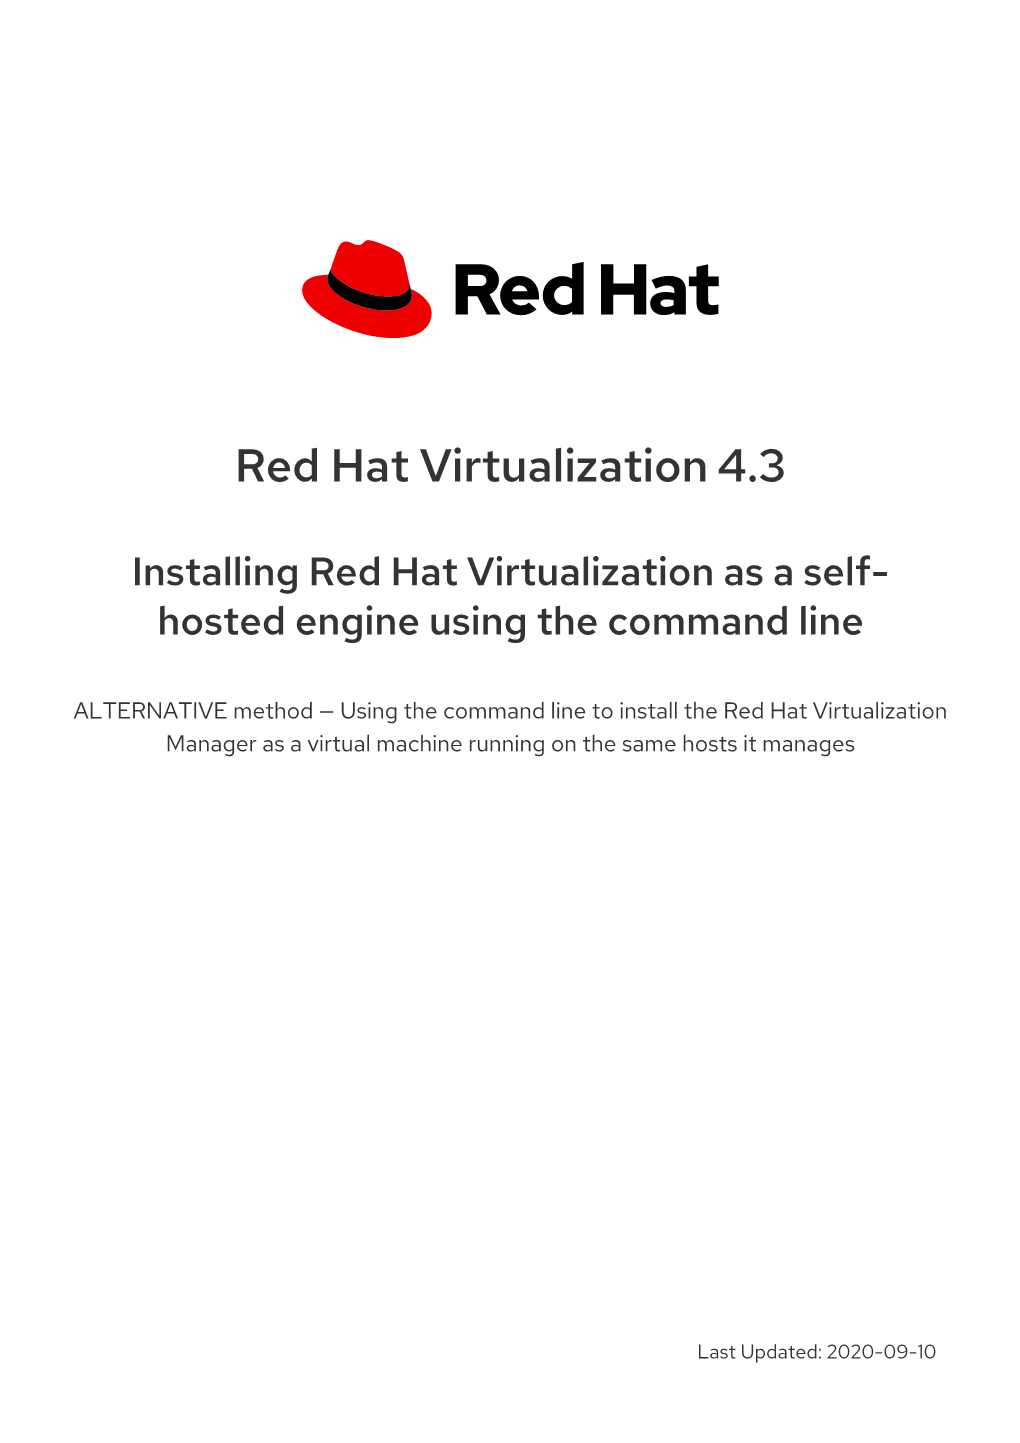 Red Hat Virtualization 4.3 Installing Red Hat Virtualization As a Self-Hosted Engine Using the Command Line